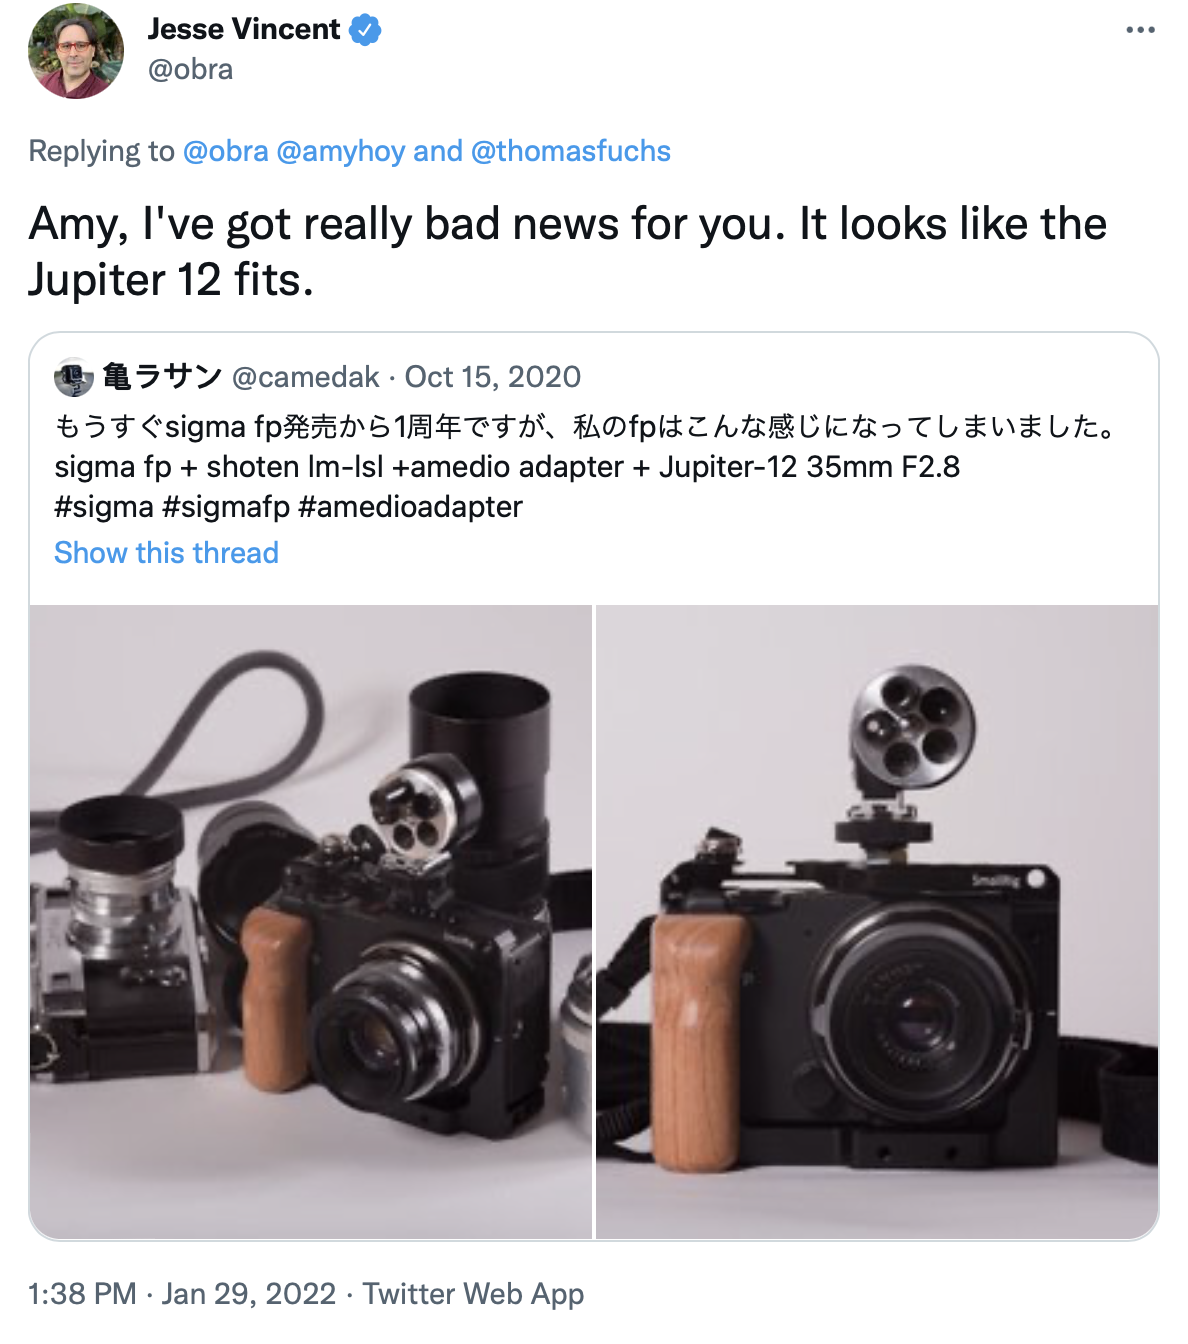 Tweet screenshot from Jesse Vincent: "Amy, I've got really bad news for you. It looks like the Jupiter 12 fits." Below this text is a quoted tweet in Japanese mentioning the term "Jupiter 12," along with with photos of a super funky-cool camera setup